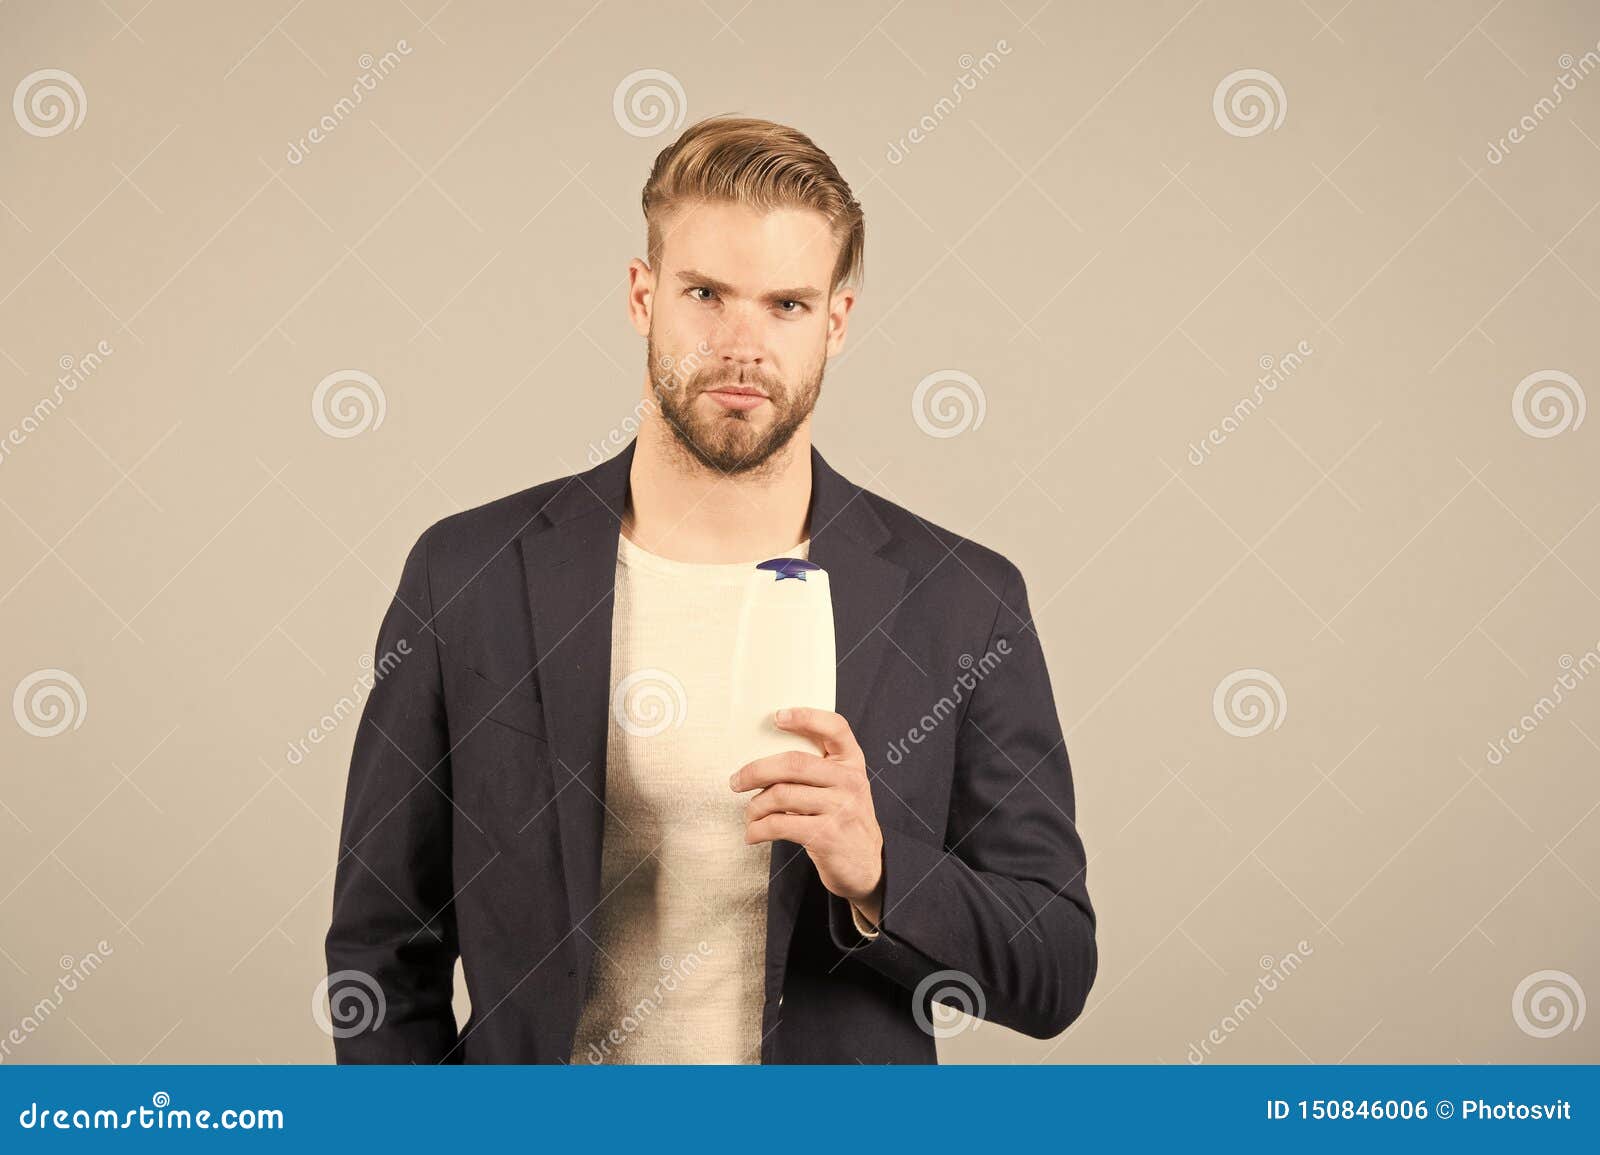 Dandruff Common Male Problem. Remedies Get Rid of Dandruff. Man Formal Suit  Hold Bottle Shampoo Grey Background Stock Photo - Image of hygienic,  barber: 150846006